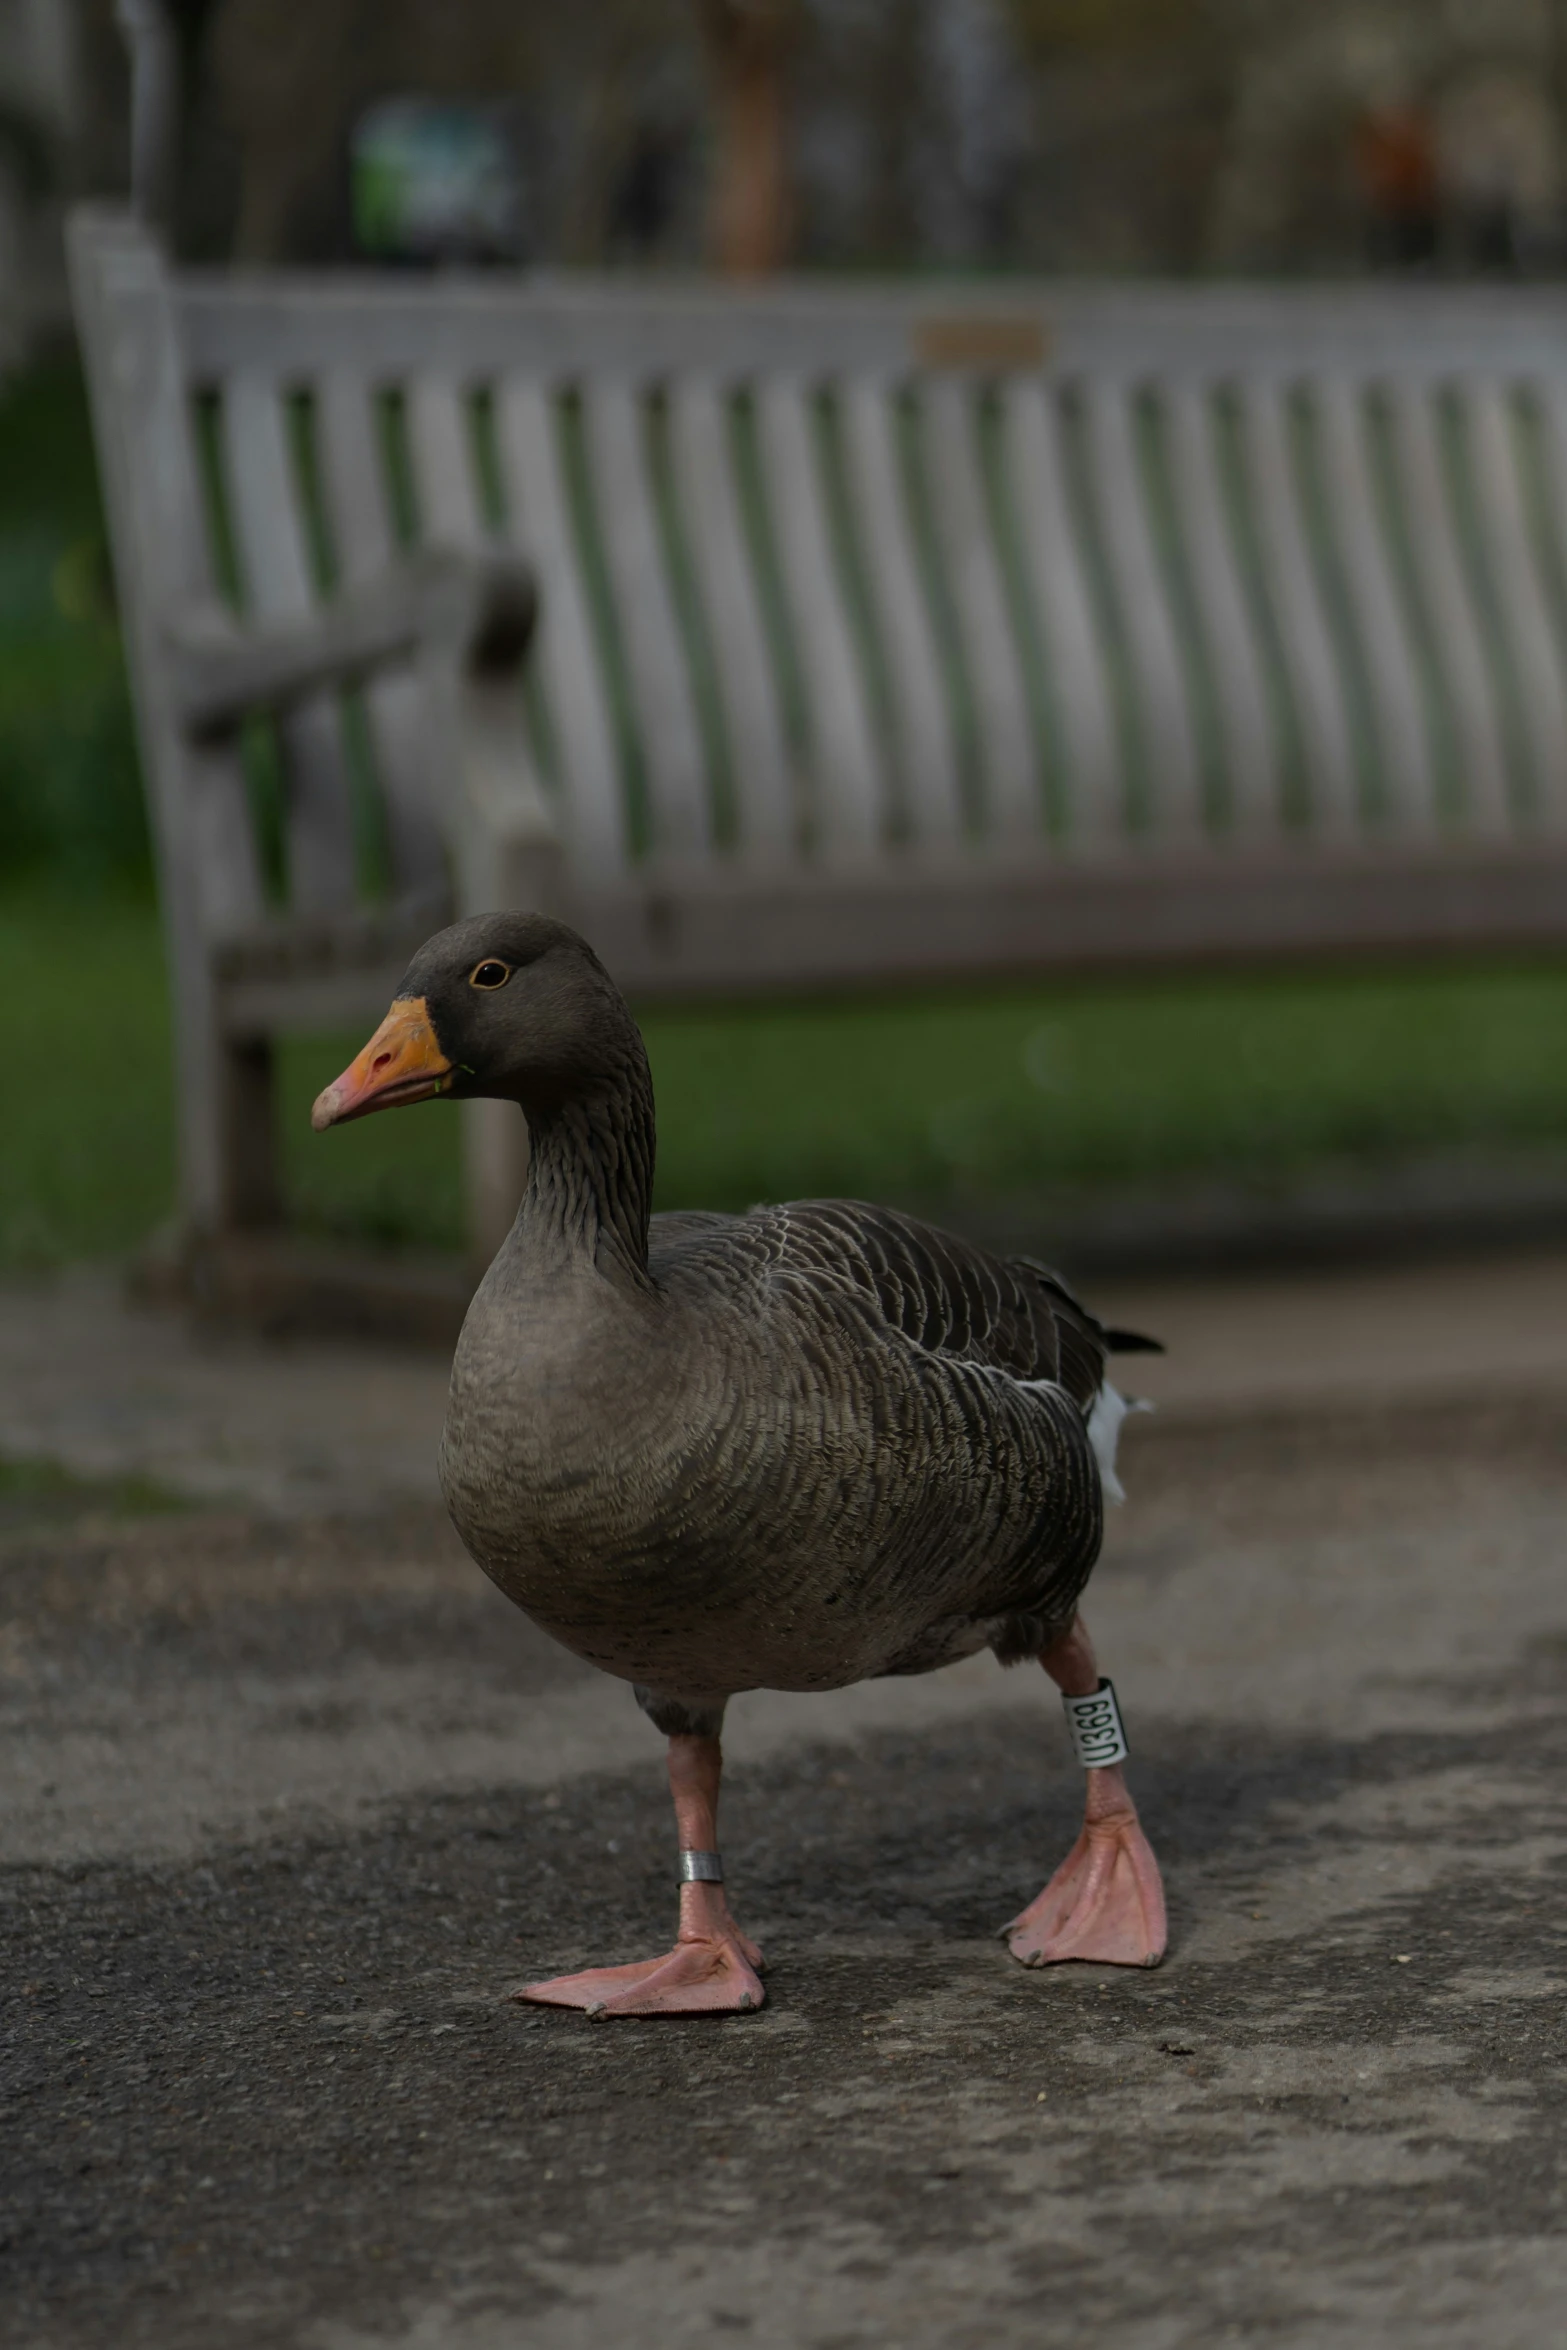 there is a duck standing on a path next to a park bench